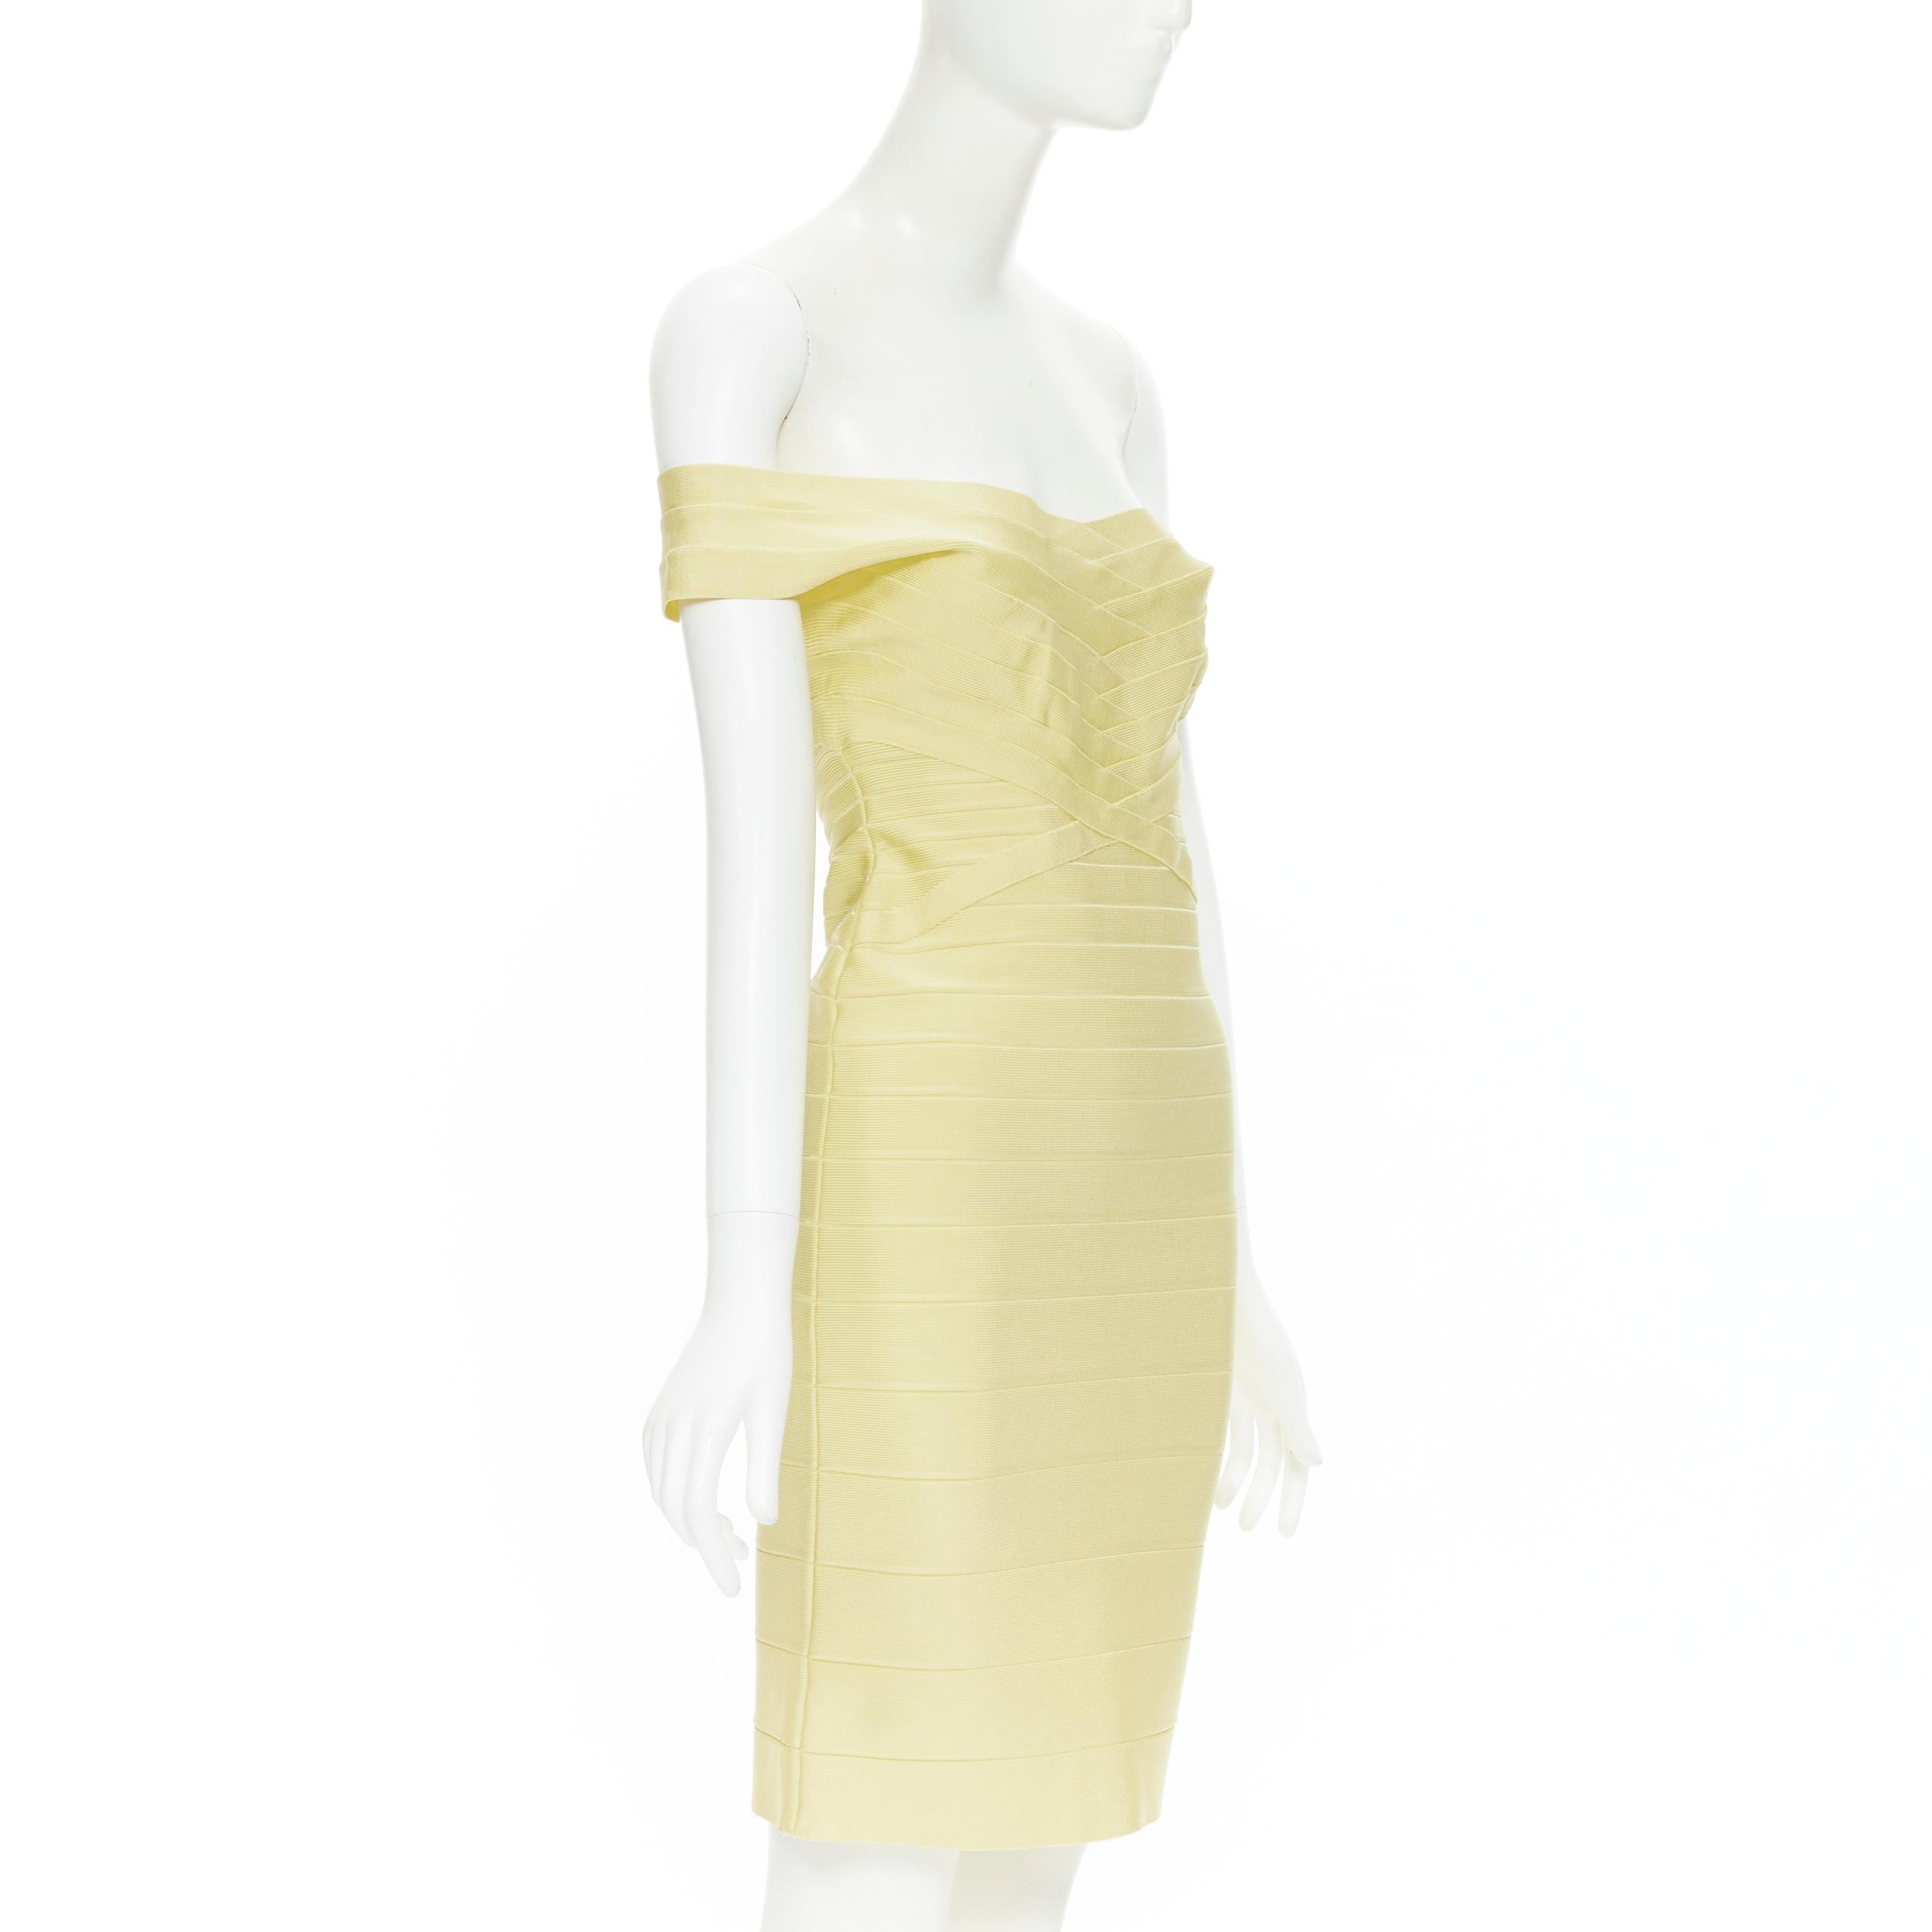 HERVE LEGER yellow off shoulder bodycon bandage fitted dress M 
Reference: CAKK/A00027 
Brand: Herve Leger 
Designer: Max Azria 
Color: Yellow 
Pattern: Solid 
Closure: Zip 
Extra Detail: Off shoulder straps. Zip back closure. Bandage dress. 
Made